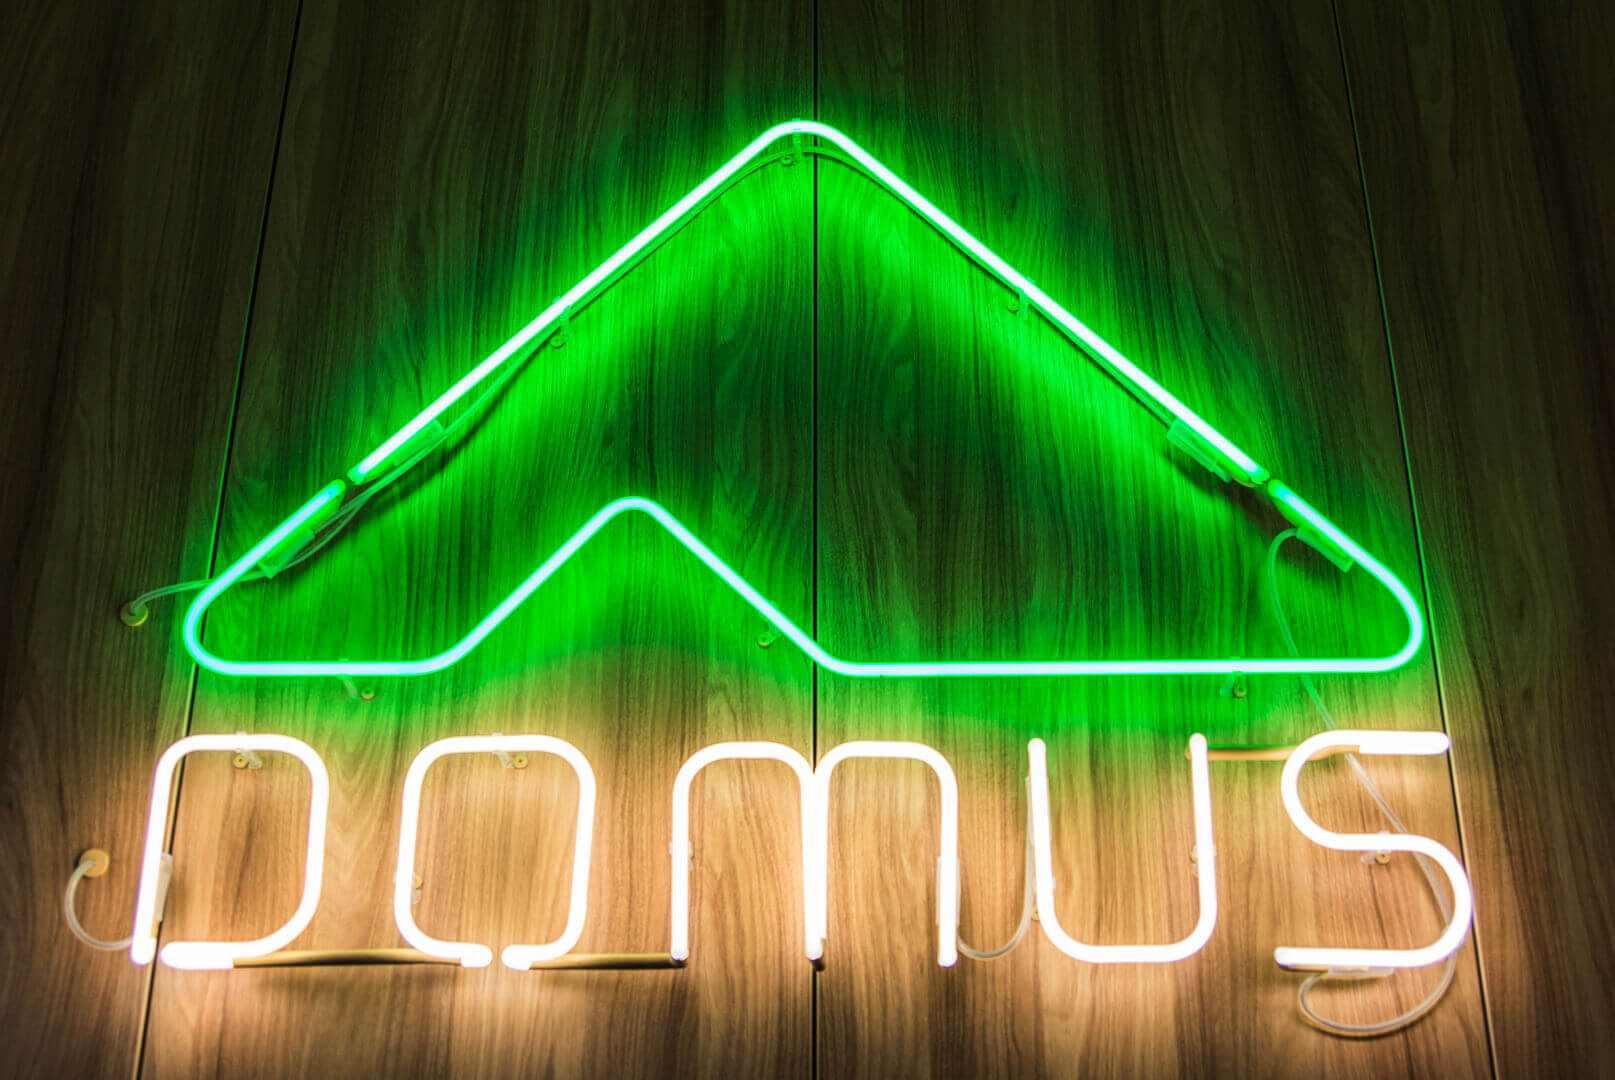 Domus - neon-domus-neon-sublighted-neon-on-a-wooden-wall-neon-interior-neon-in-office-neon-on-demand-architects-silver-green-colour-white-neon-mounted-to-the-wall-letter-neon